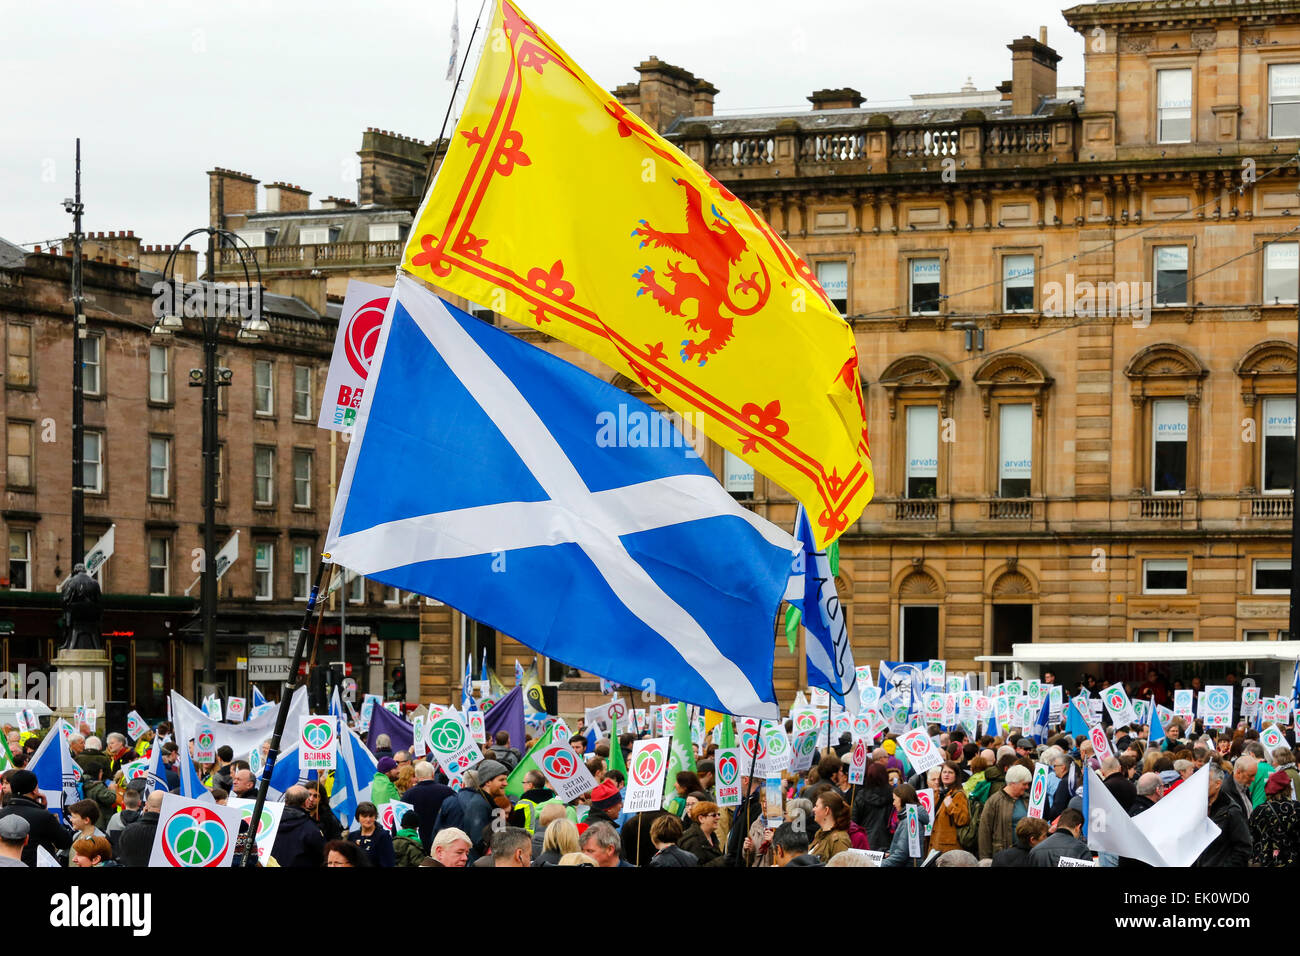 More than 2000 demonstrators took part in an Anti Trident and anti nuclear protest march in Glasgow, starting in George Square and parading through the city centre. Several politicians took part including Patrick Harvie, MSP, the leader of the Scottish Green Party Stock Photo